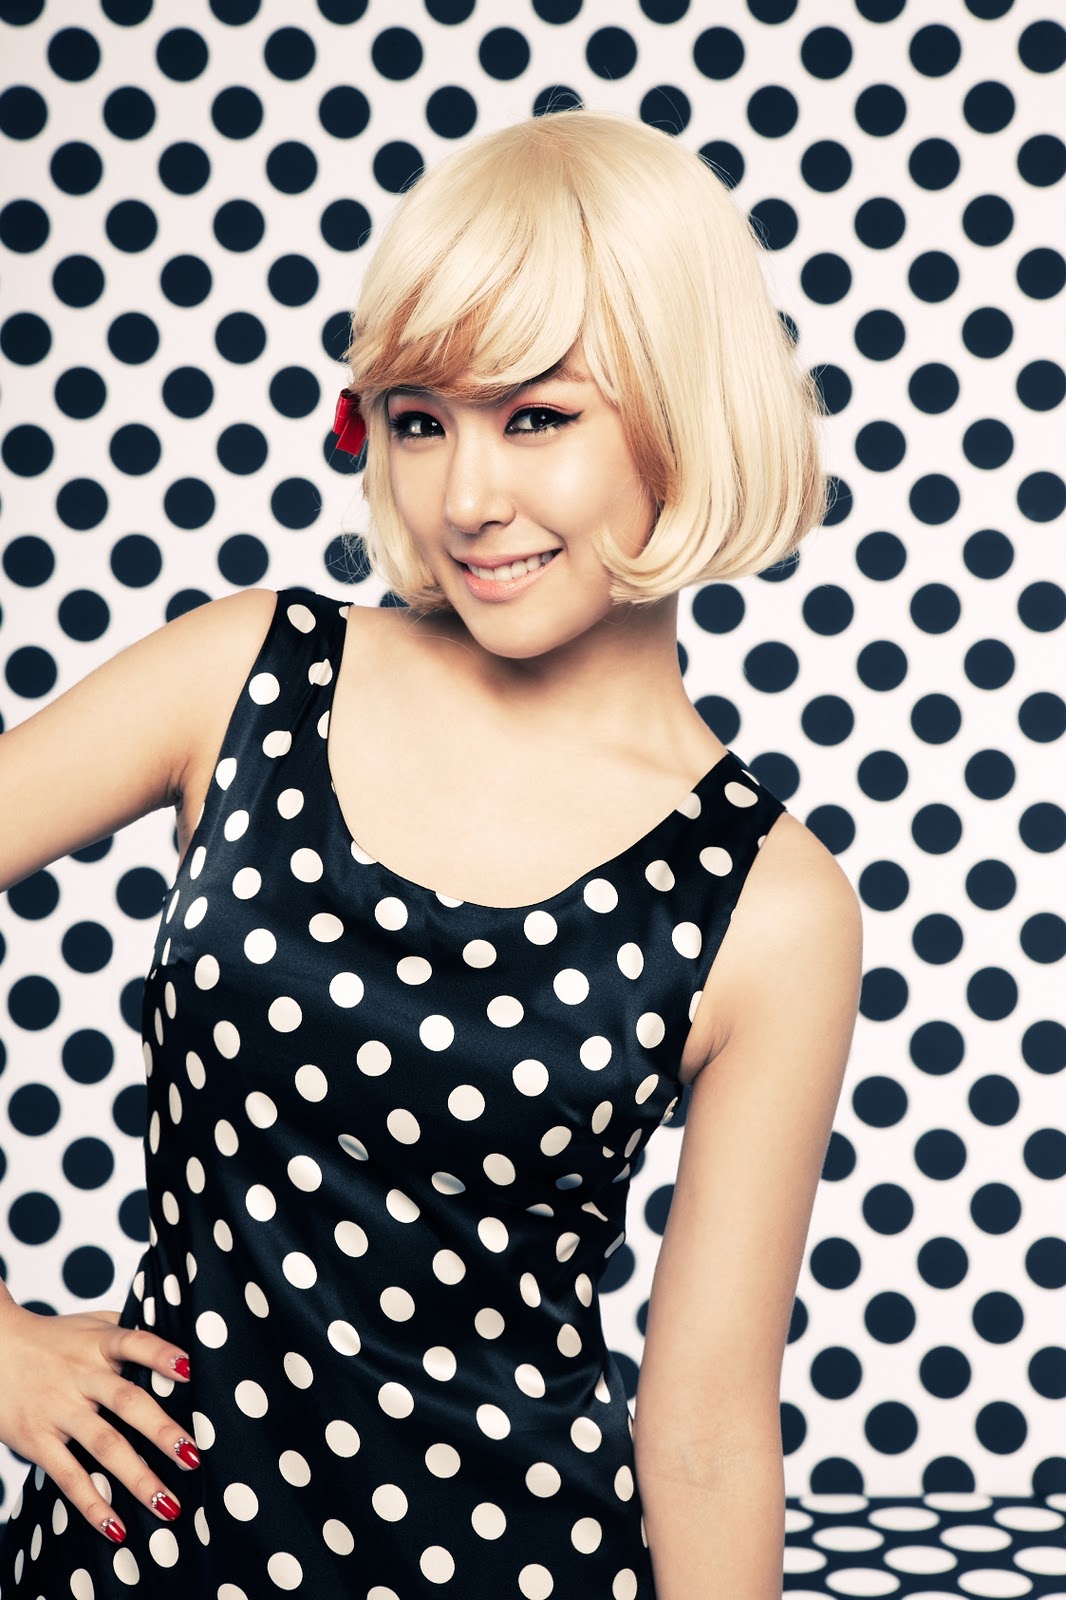 stephanie young hwang debut